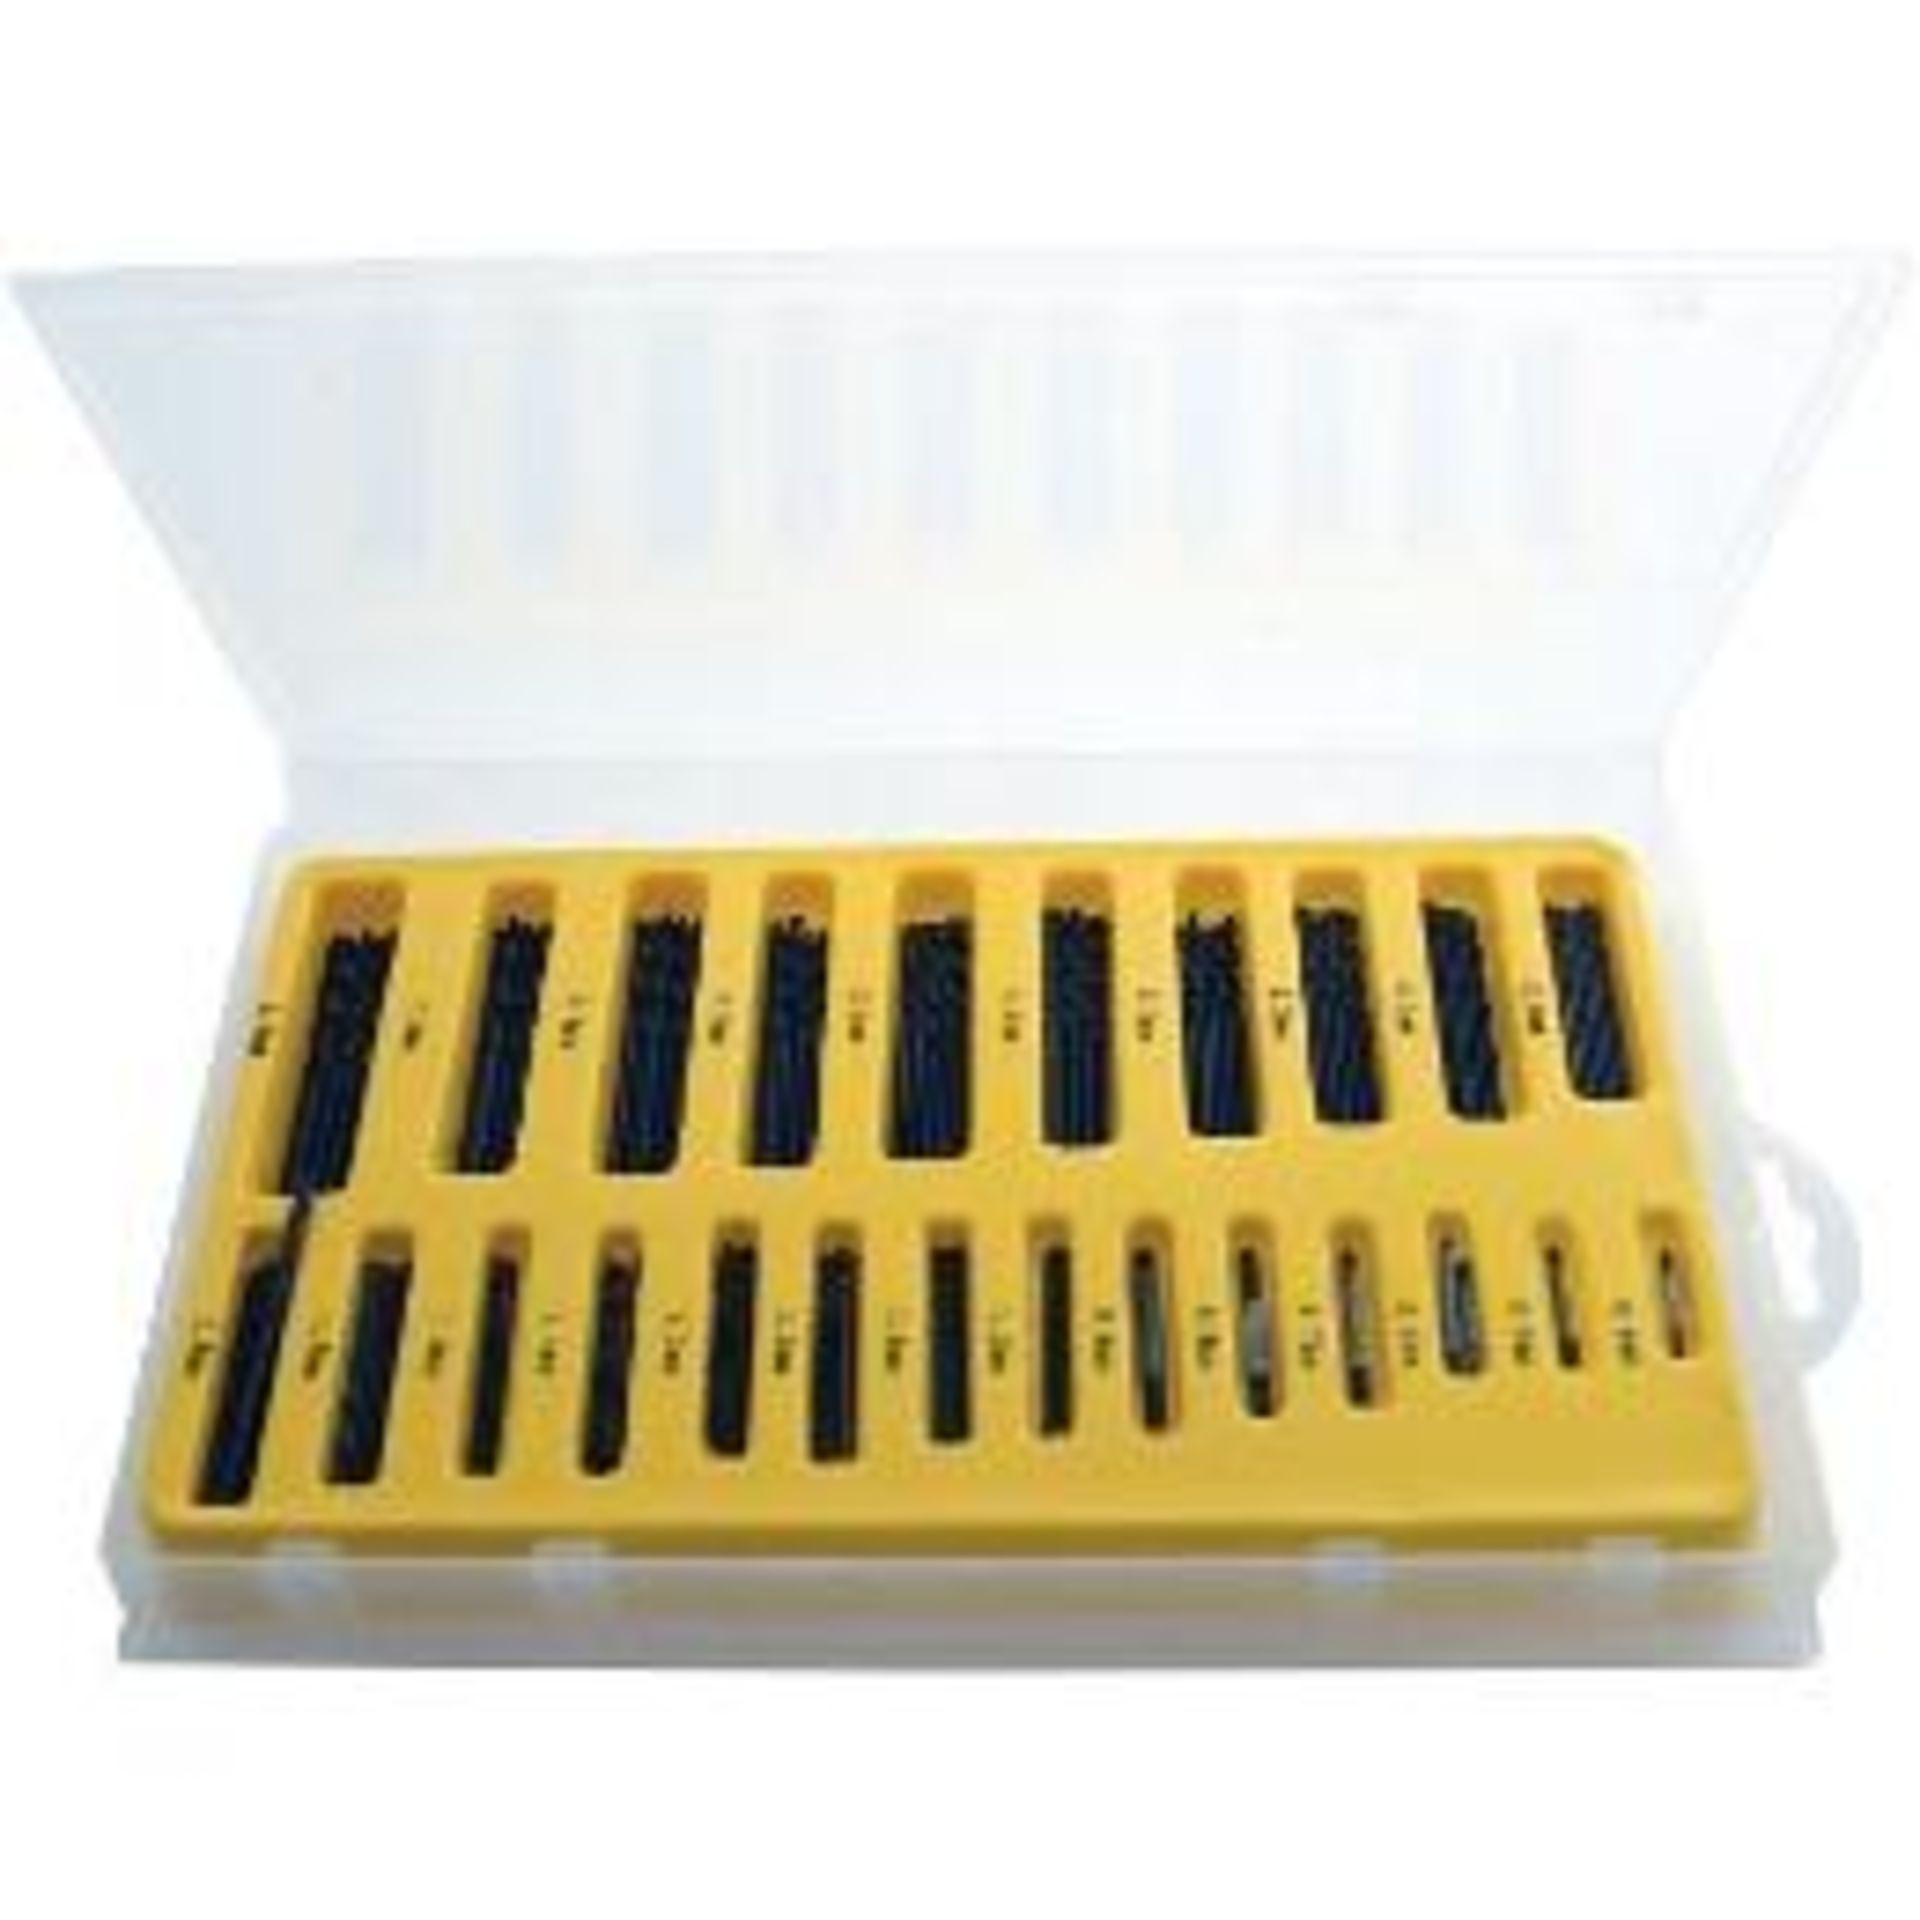 V Brand New 150 Piece Assorted Drill Bit Set - Sizes Ranging From 0.4mm to 3.2mm